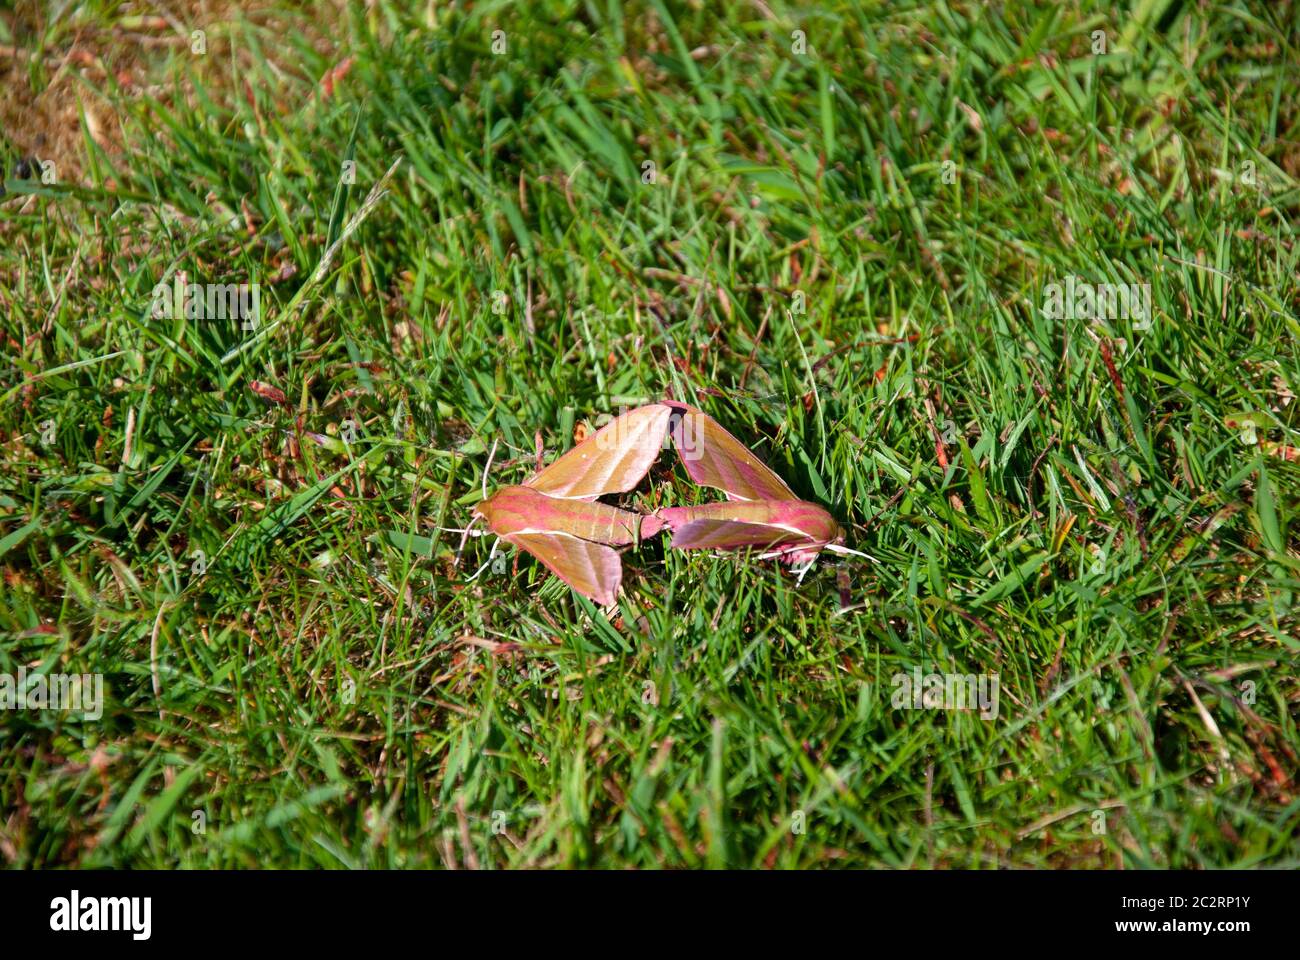 Two Elephant Hawk-Moths Mating on the Grass close up landscape view of a pair couple duo pink green colour elephant hawk moths family Sphingidae deile Stock Photo